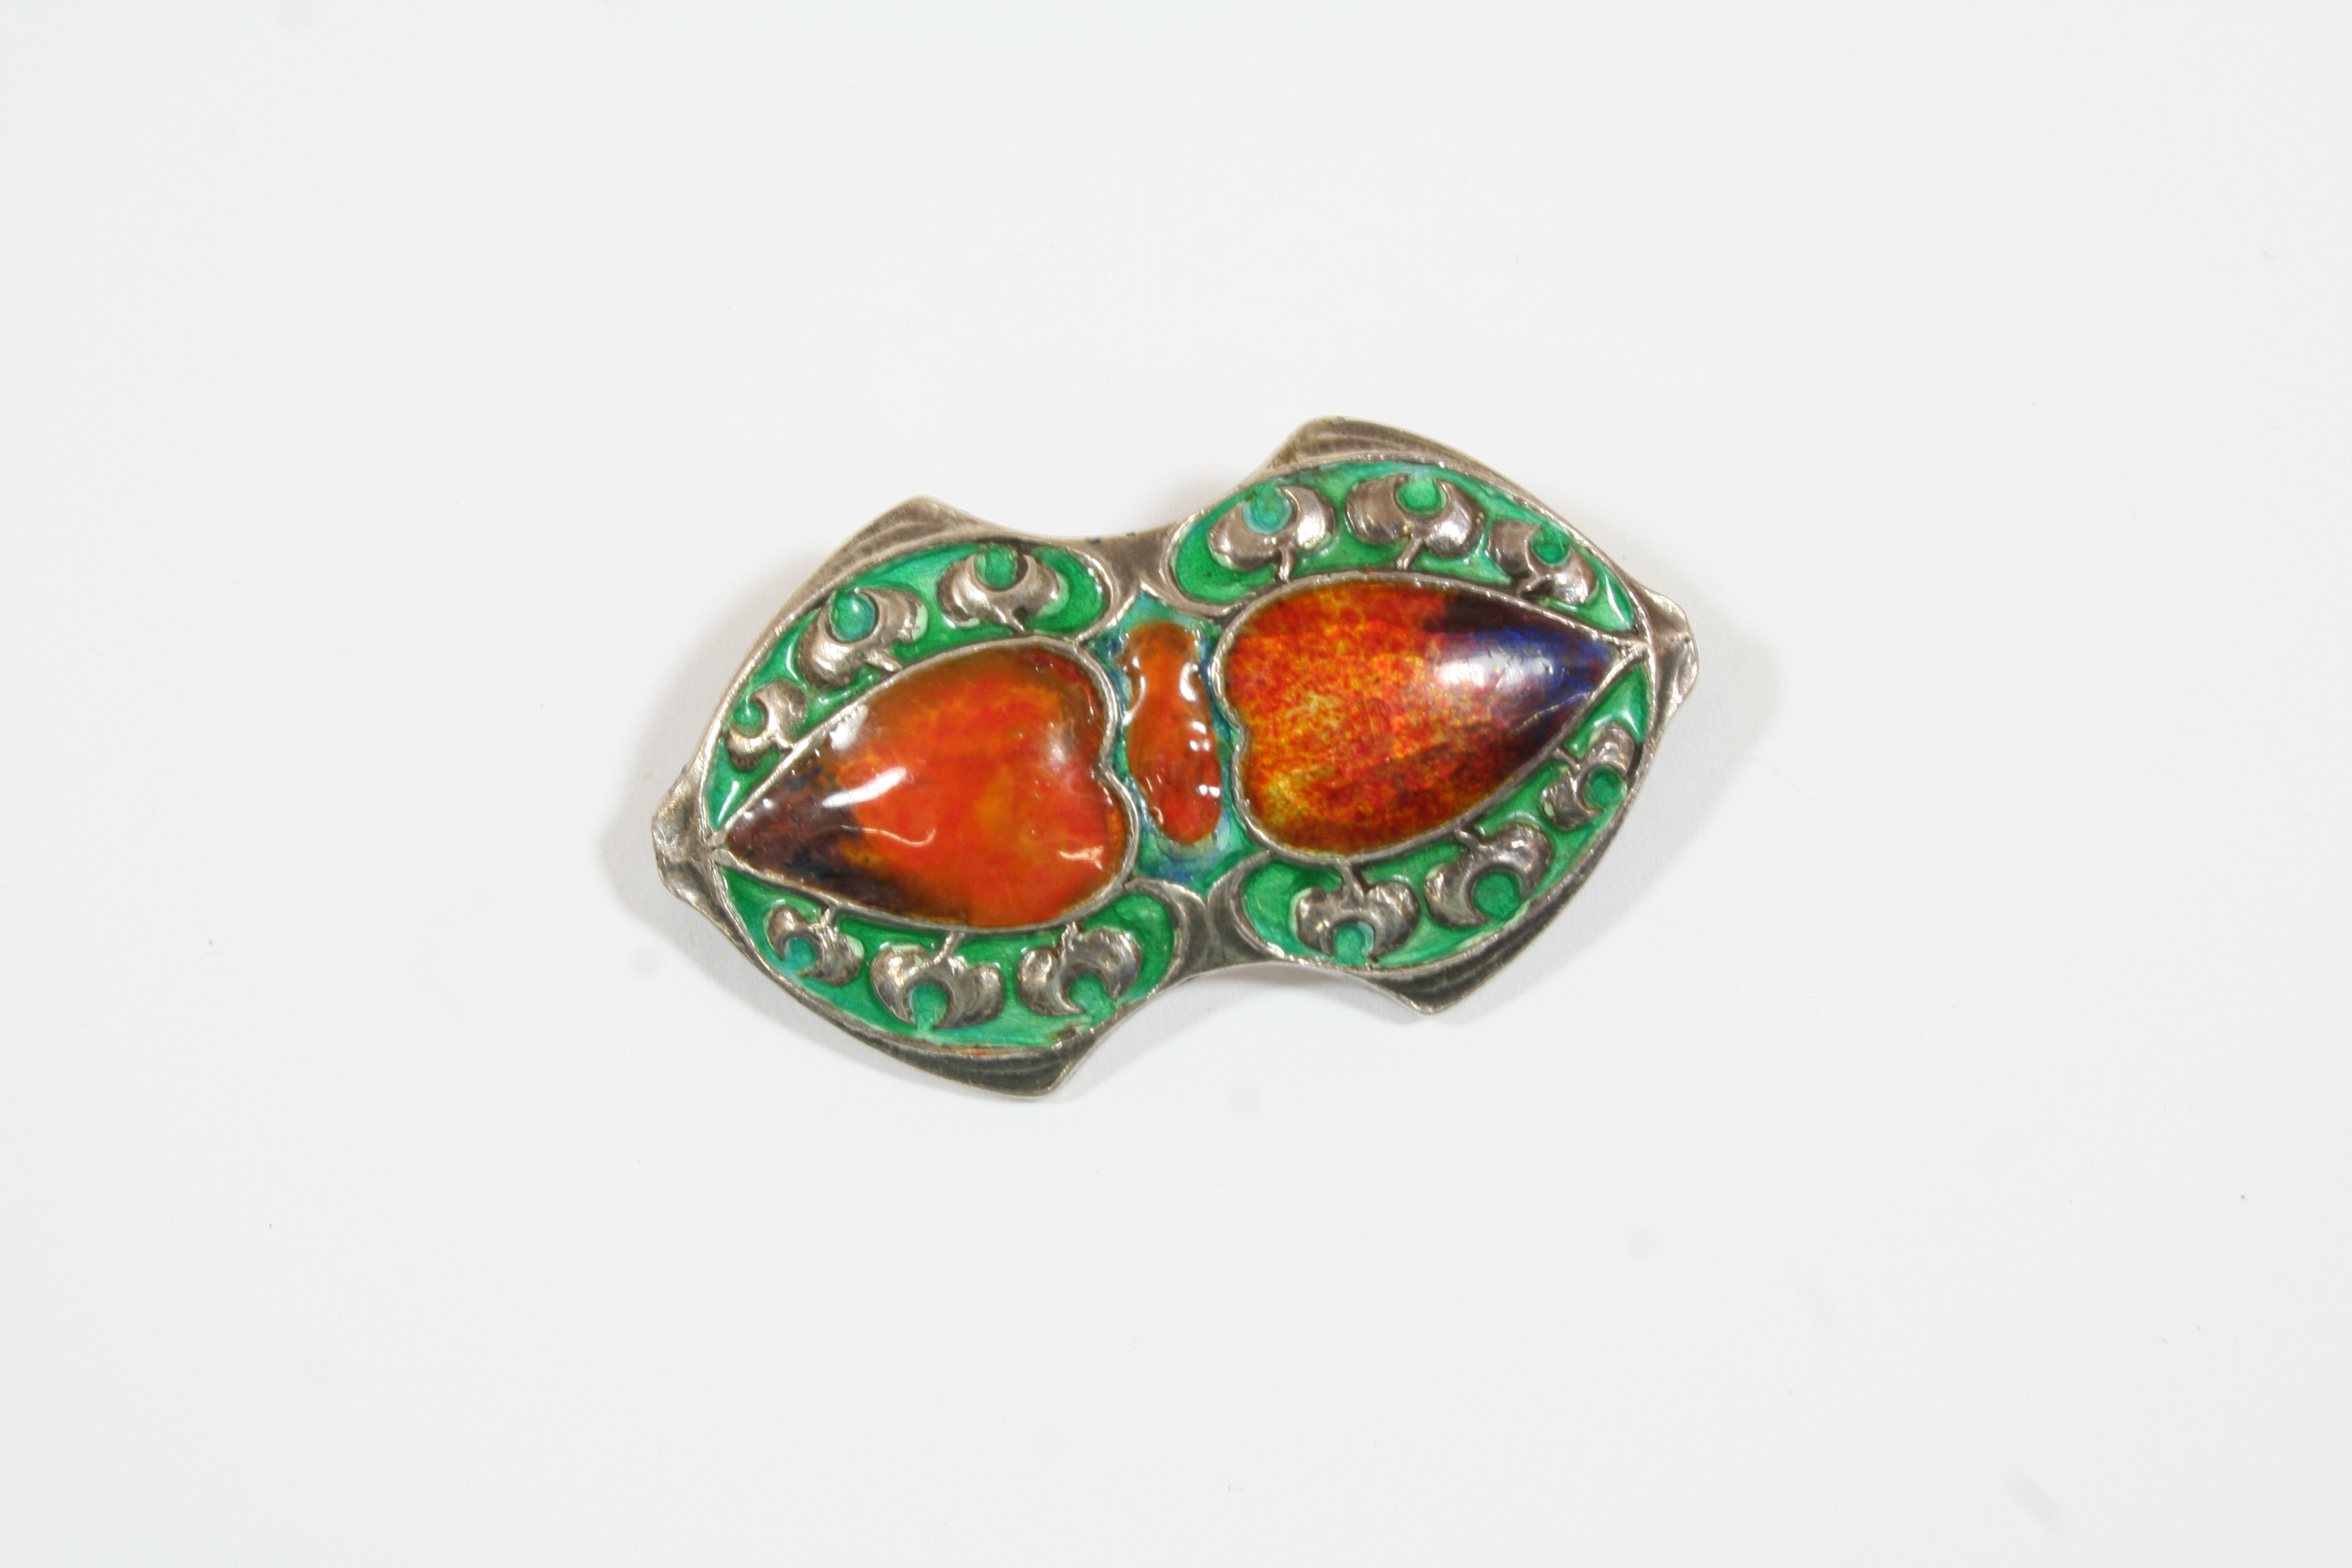 AN ENAMEL AND SILVER BROOCH BY MURRLE BENNETT & CO. centred with two heart motifs decorated with